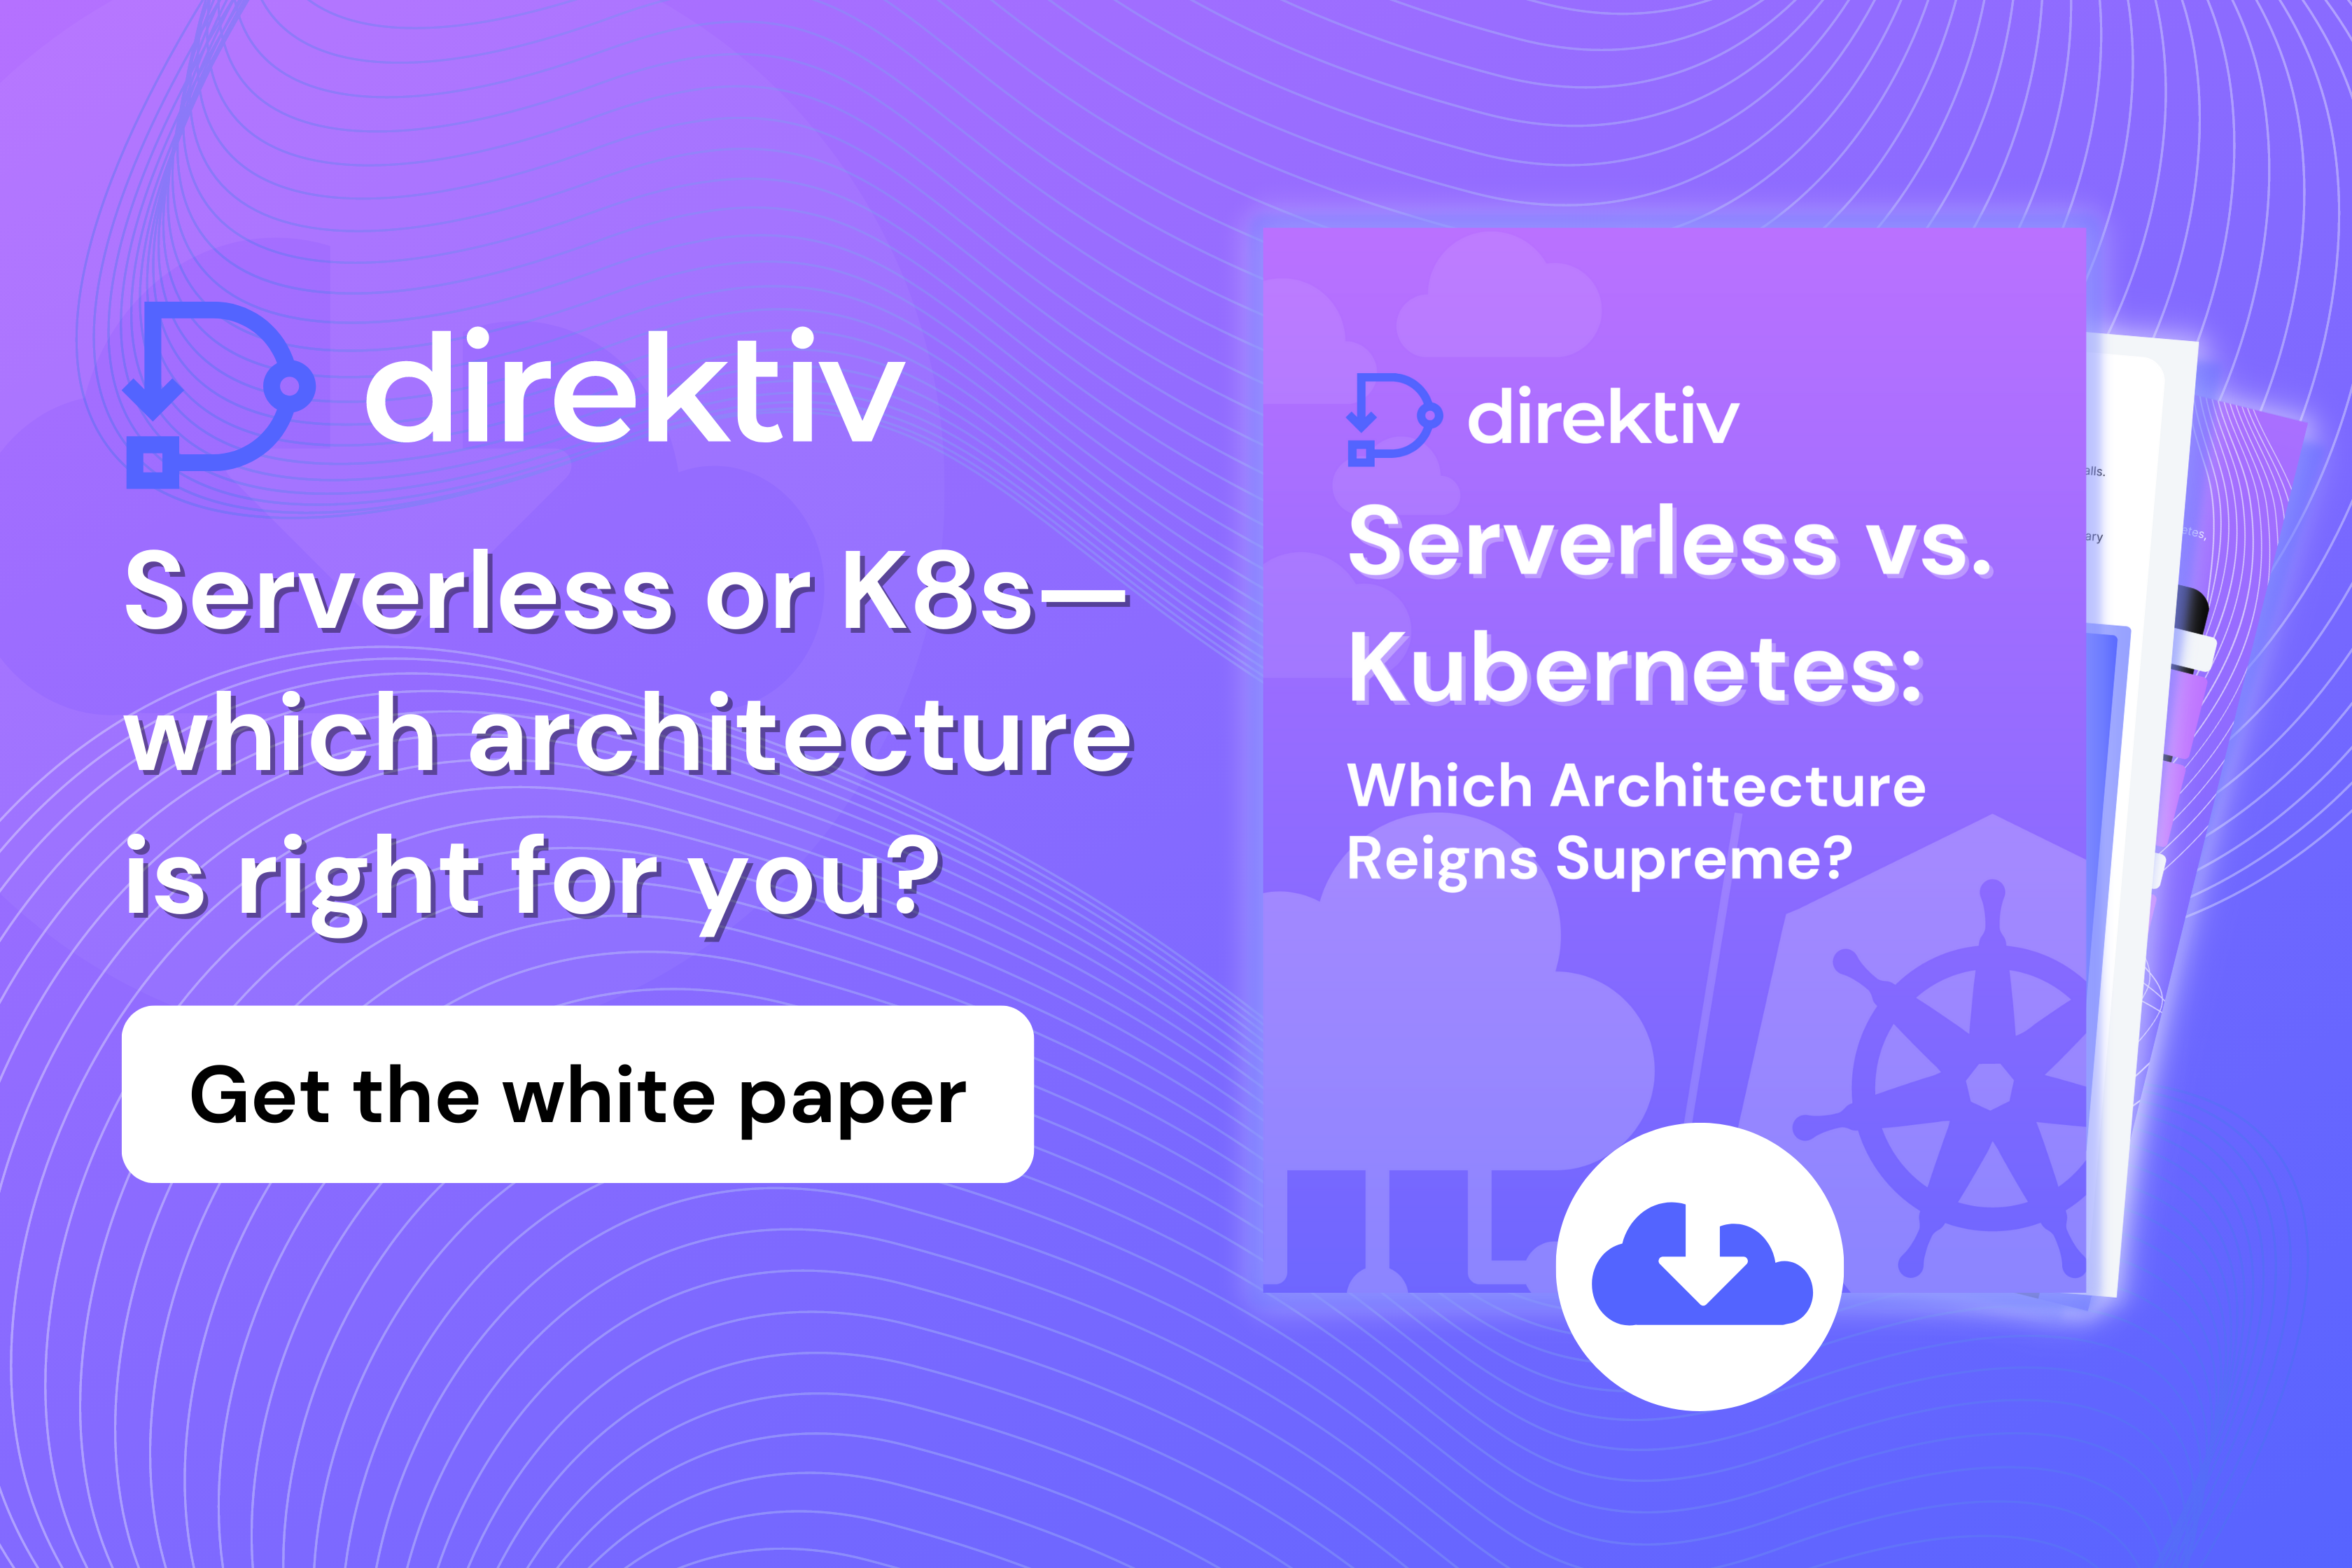 Serverless vs. Kubernetes—which architecture is right for you? Our white paper will dive into the pros and cons of both. It’s up to you to decide.